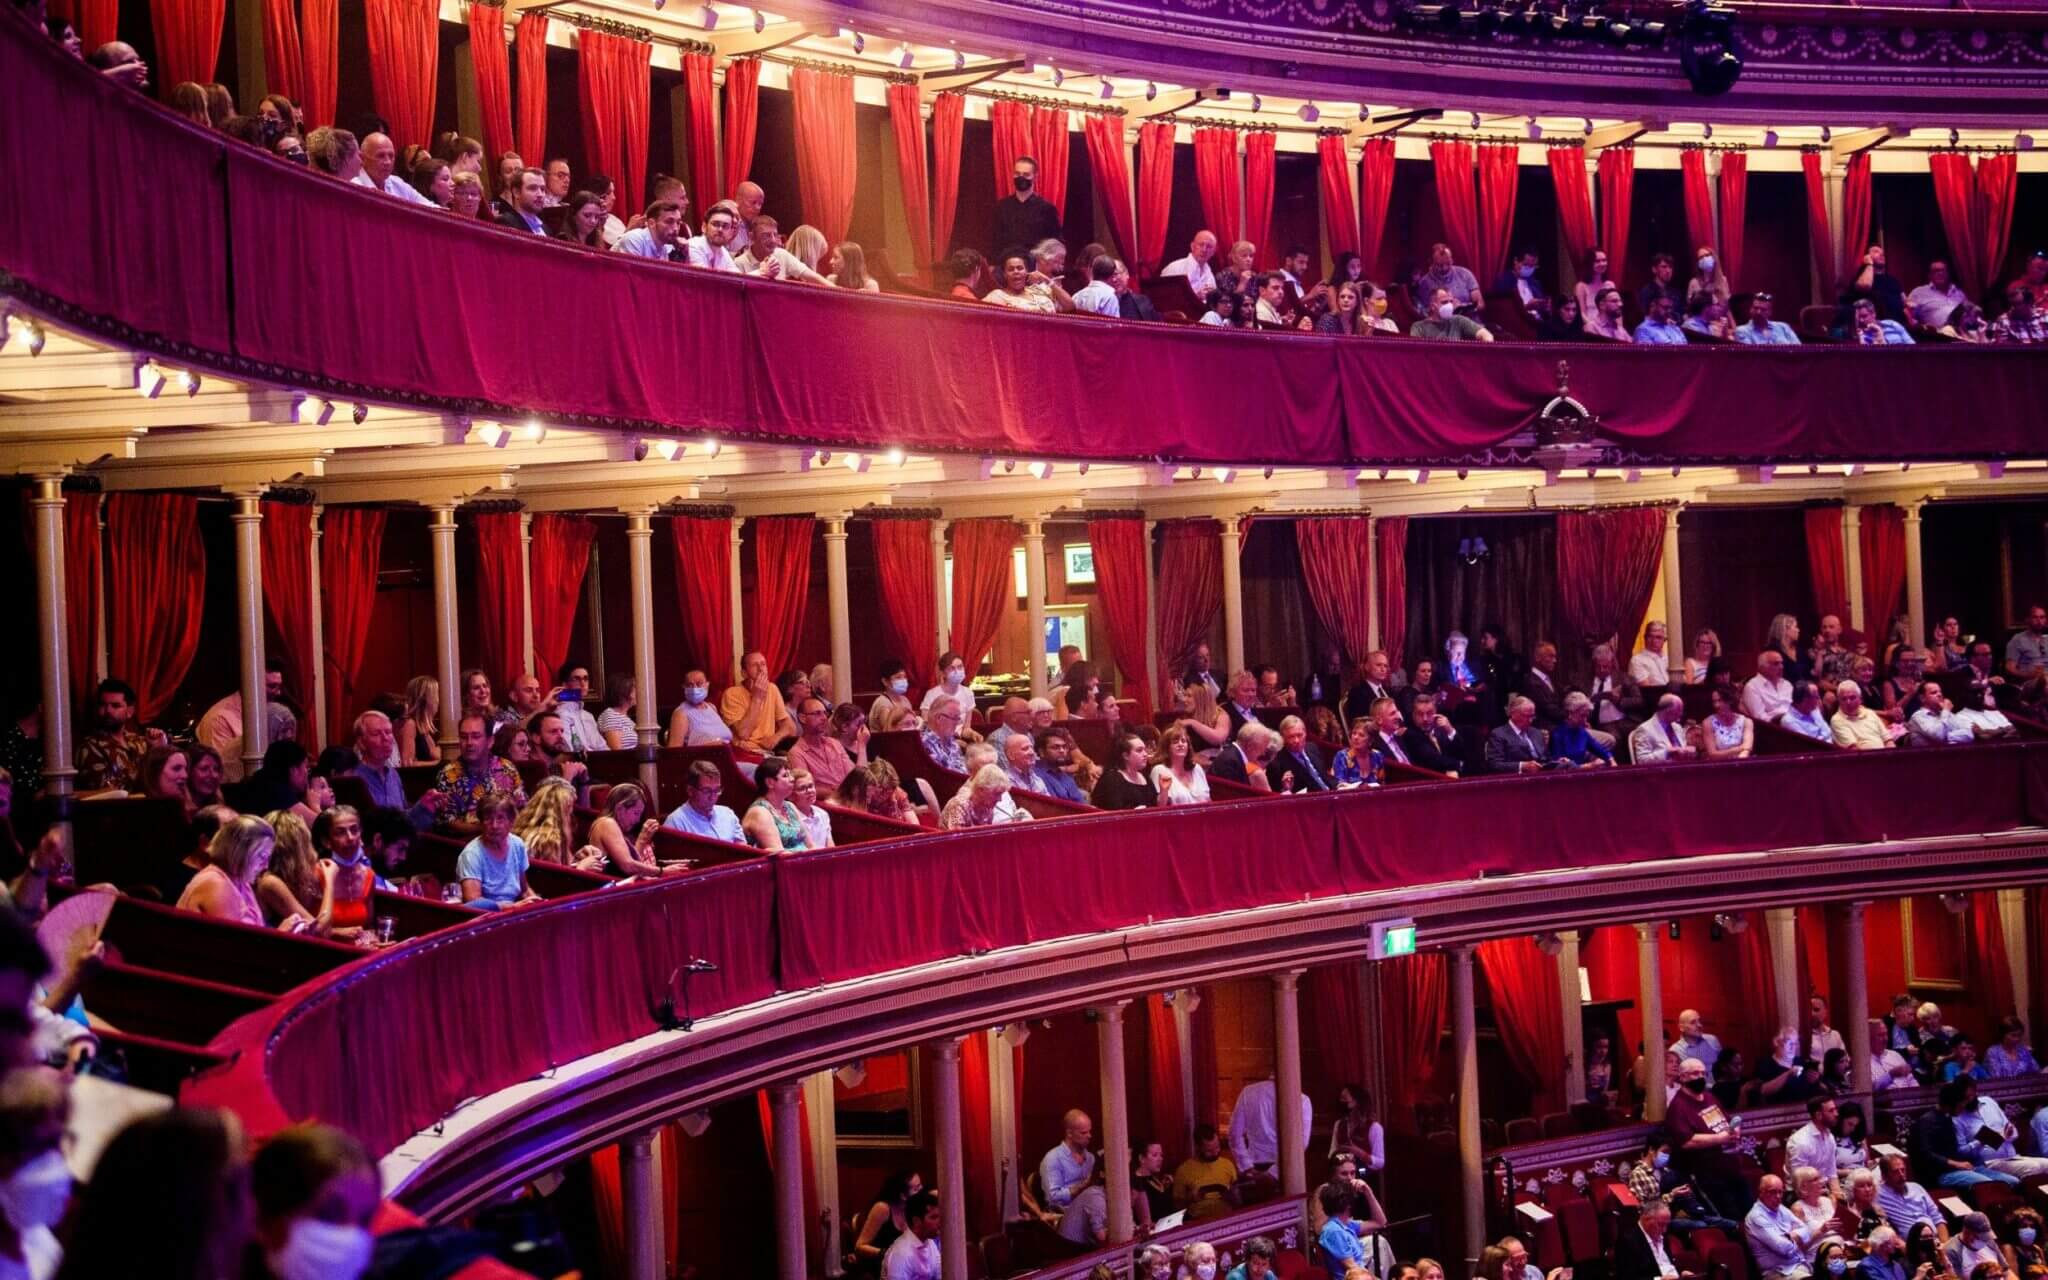 Image of guests watching Cirrque in the Royal Albert Hall